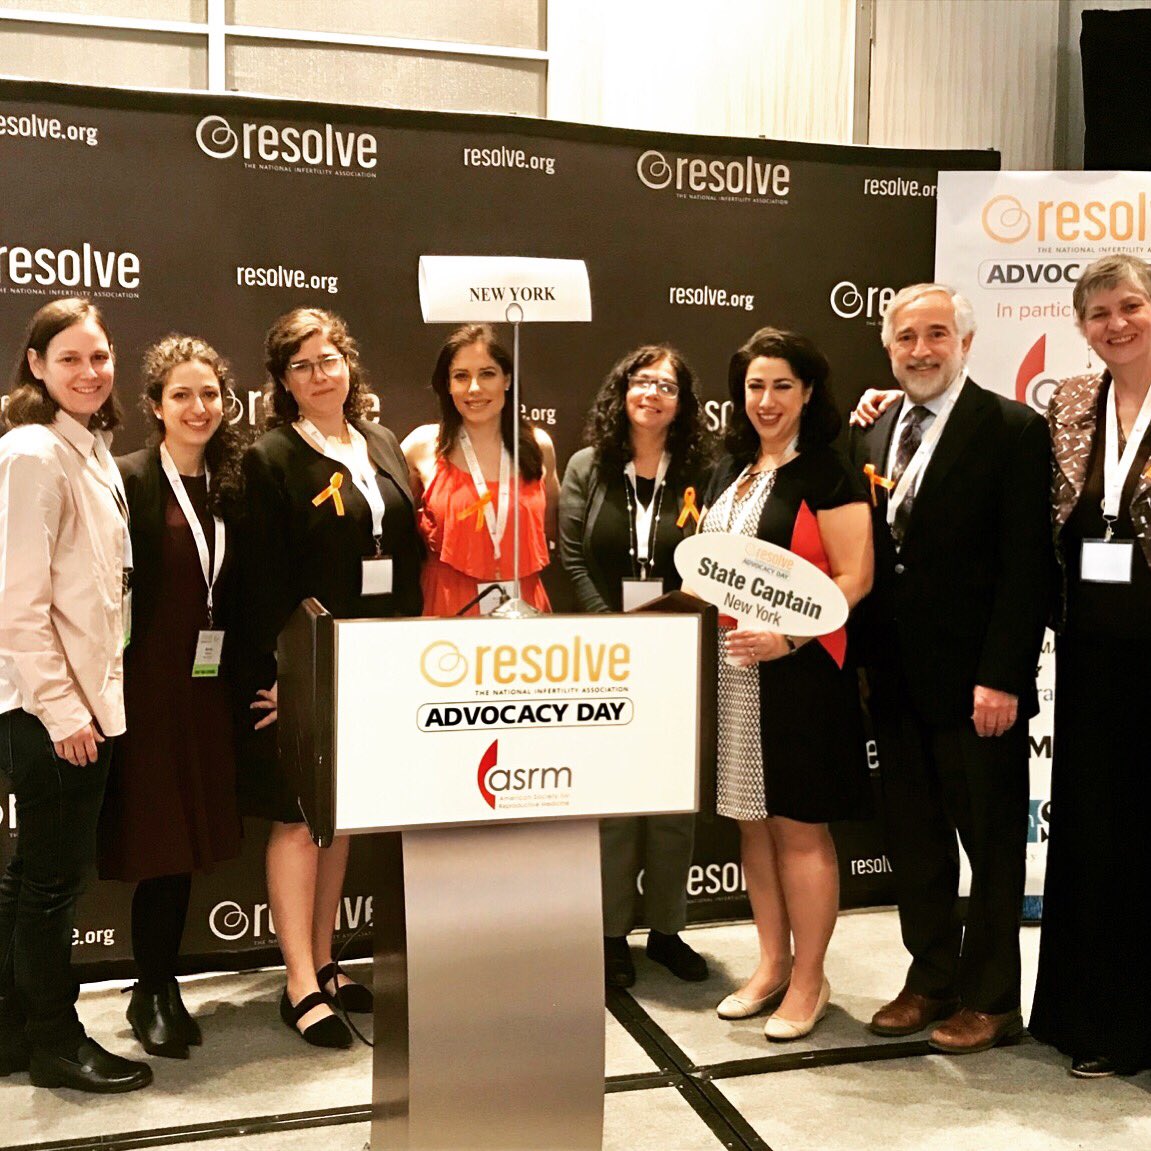 The New York Group ready to Advocate!
#IFAdvocacy
#access2care
#ivf4vets
#infertilityuncovered